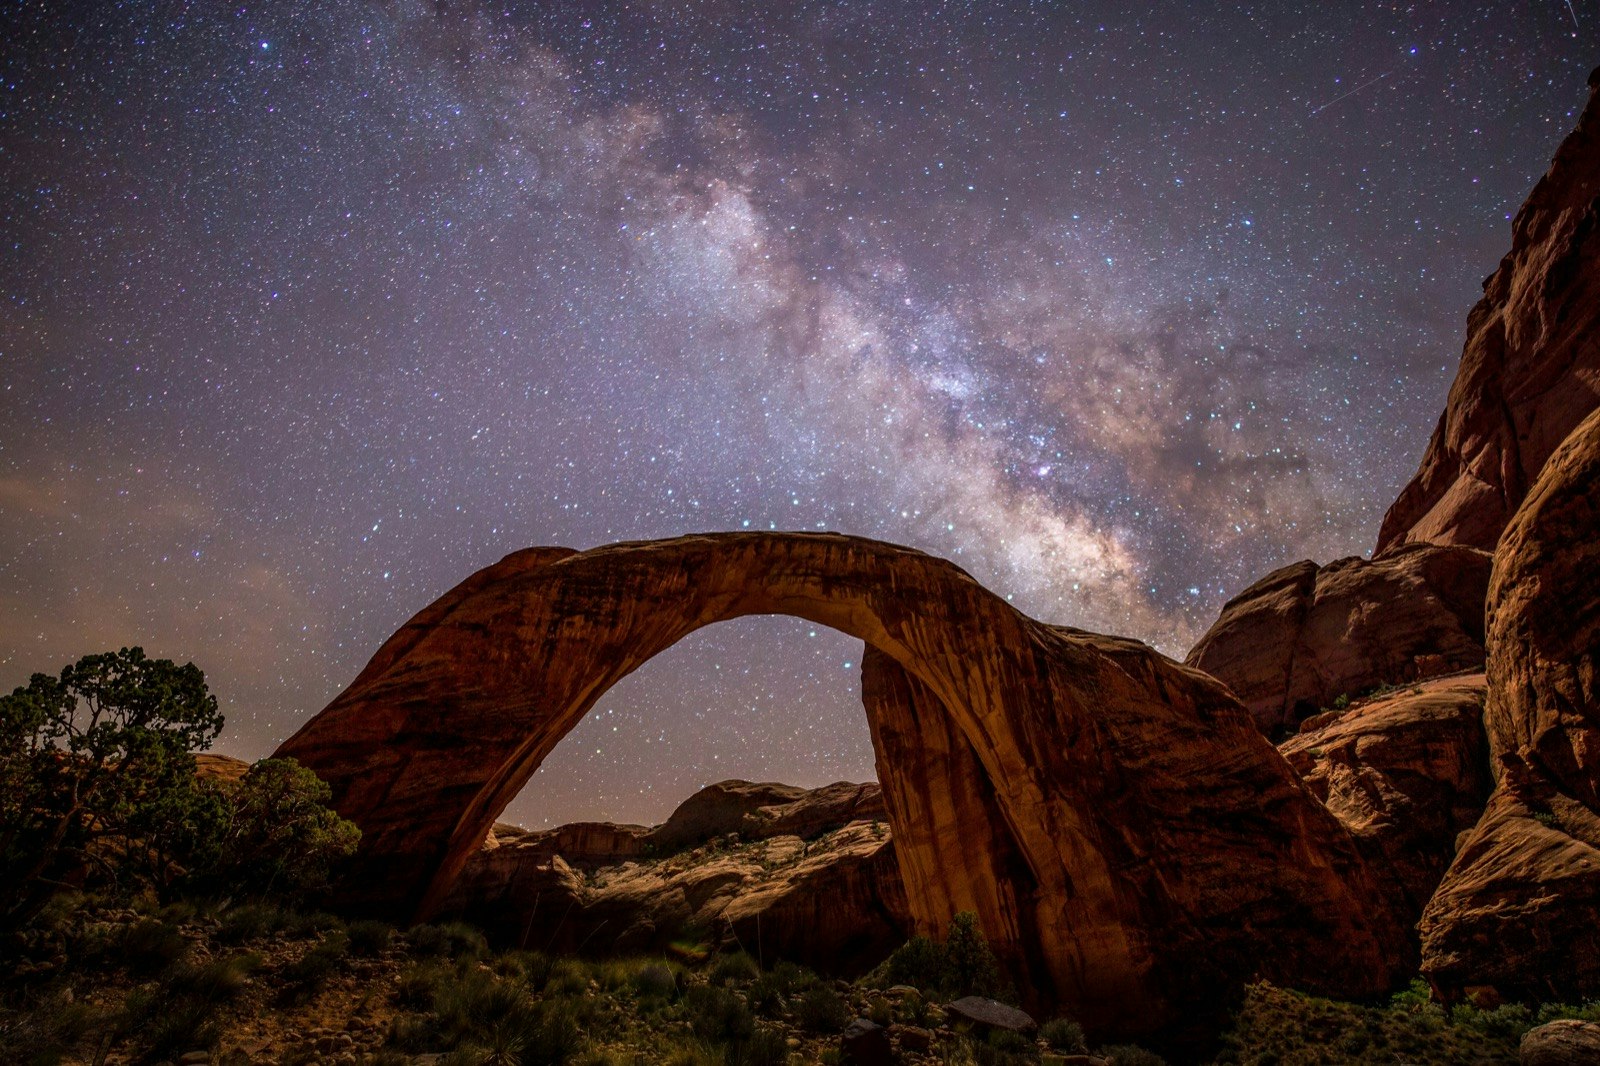 The Milky Way is seen in a dark sky above the stone arch of Rainbow Bridge National Monument